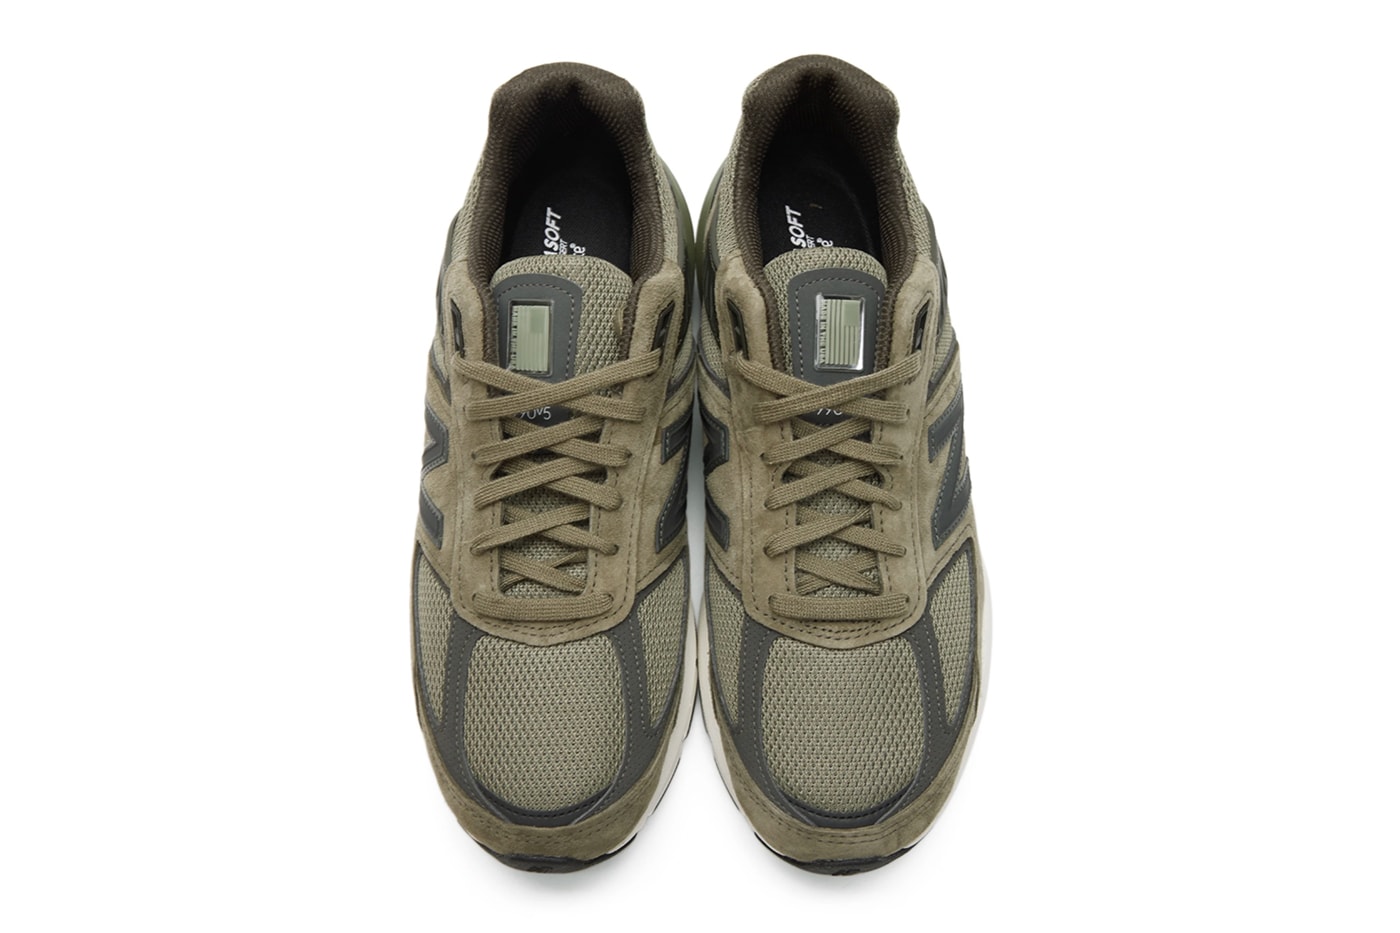 New Balance 990v5 Made in USA Covert Green m990ae5 suede mesh olive legends collection